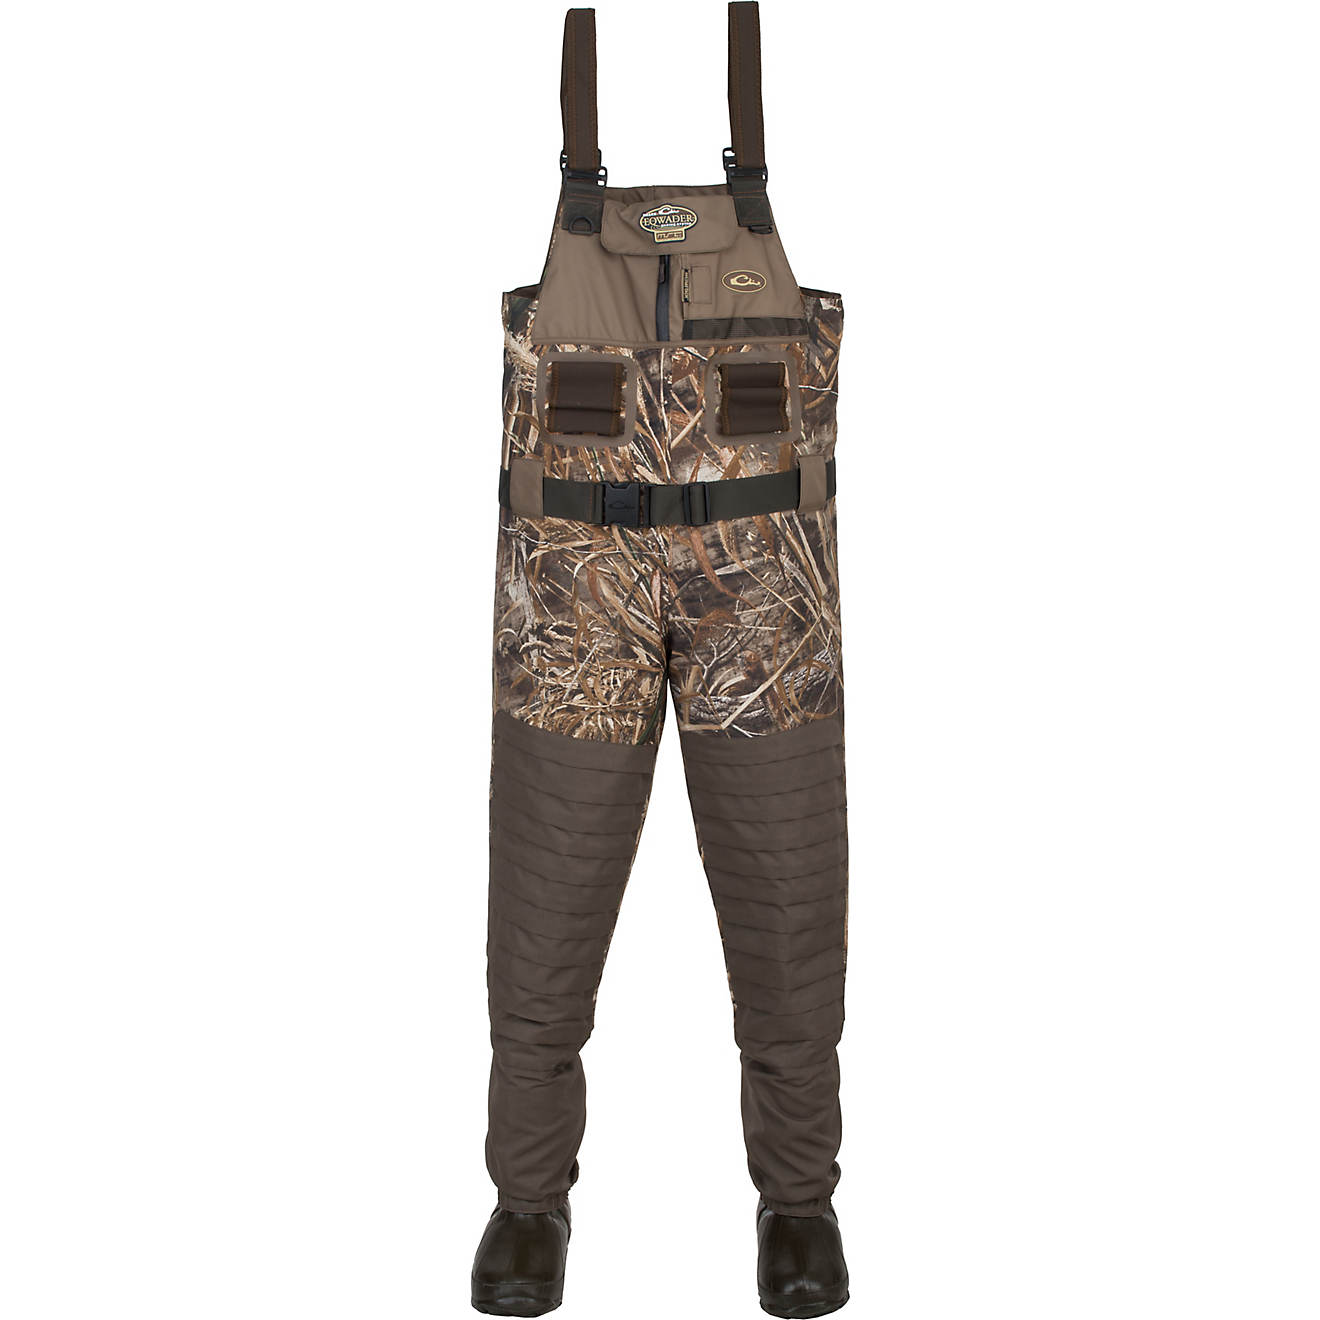 Drake Waterfowl Women's New Eqwader Breathable Insulated Wader Academy